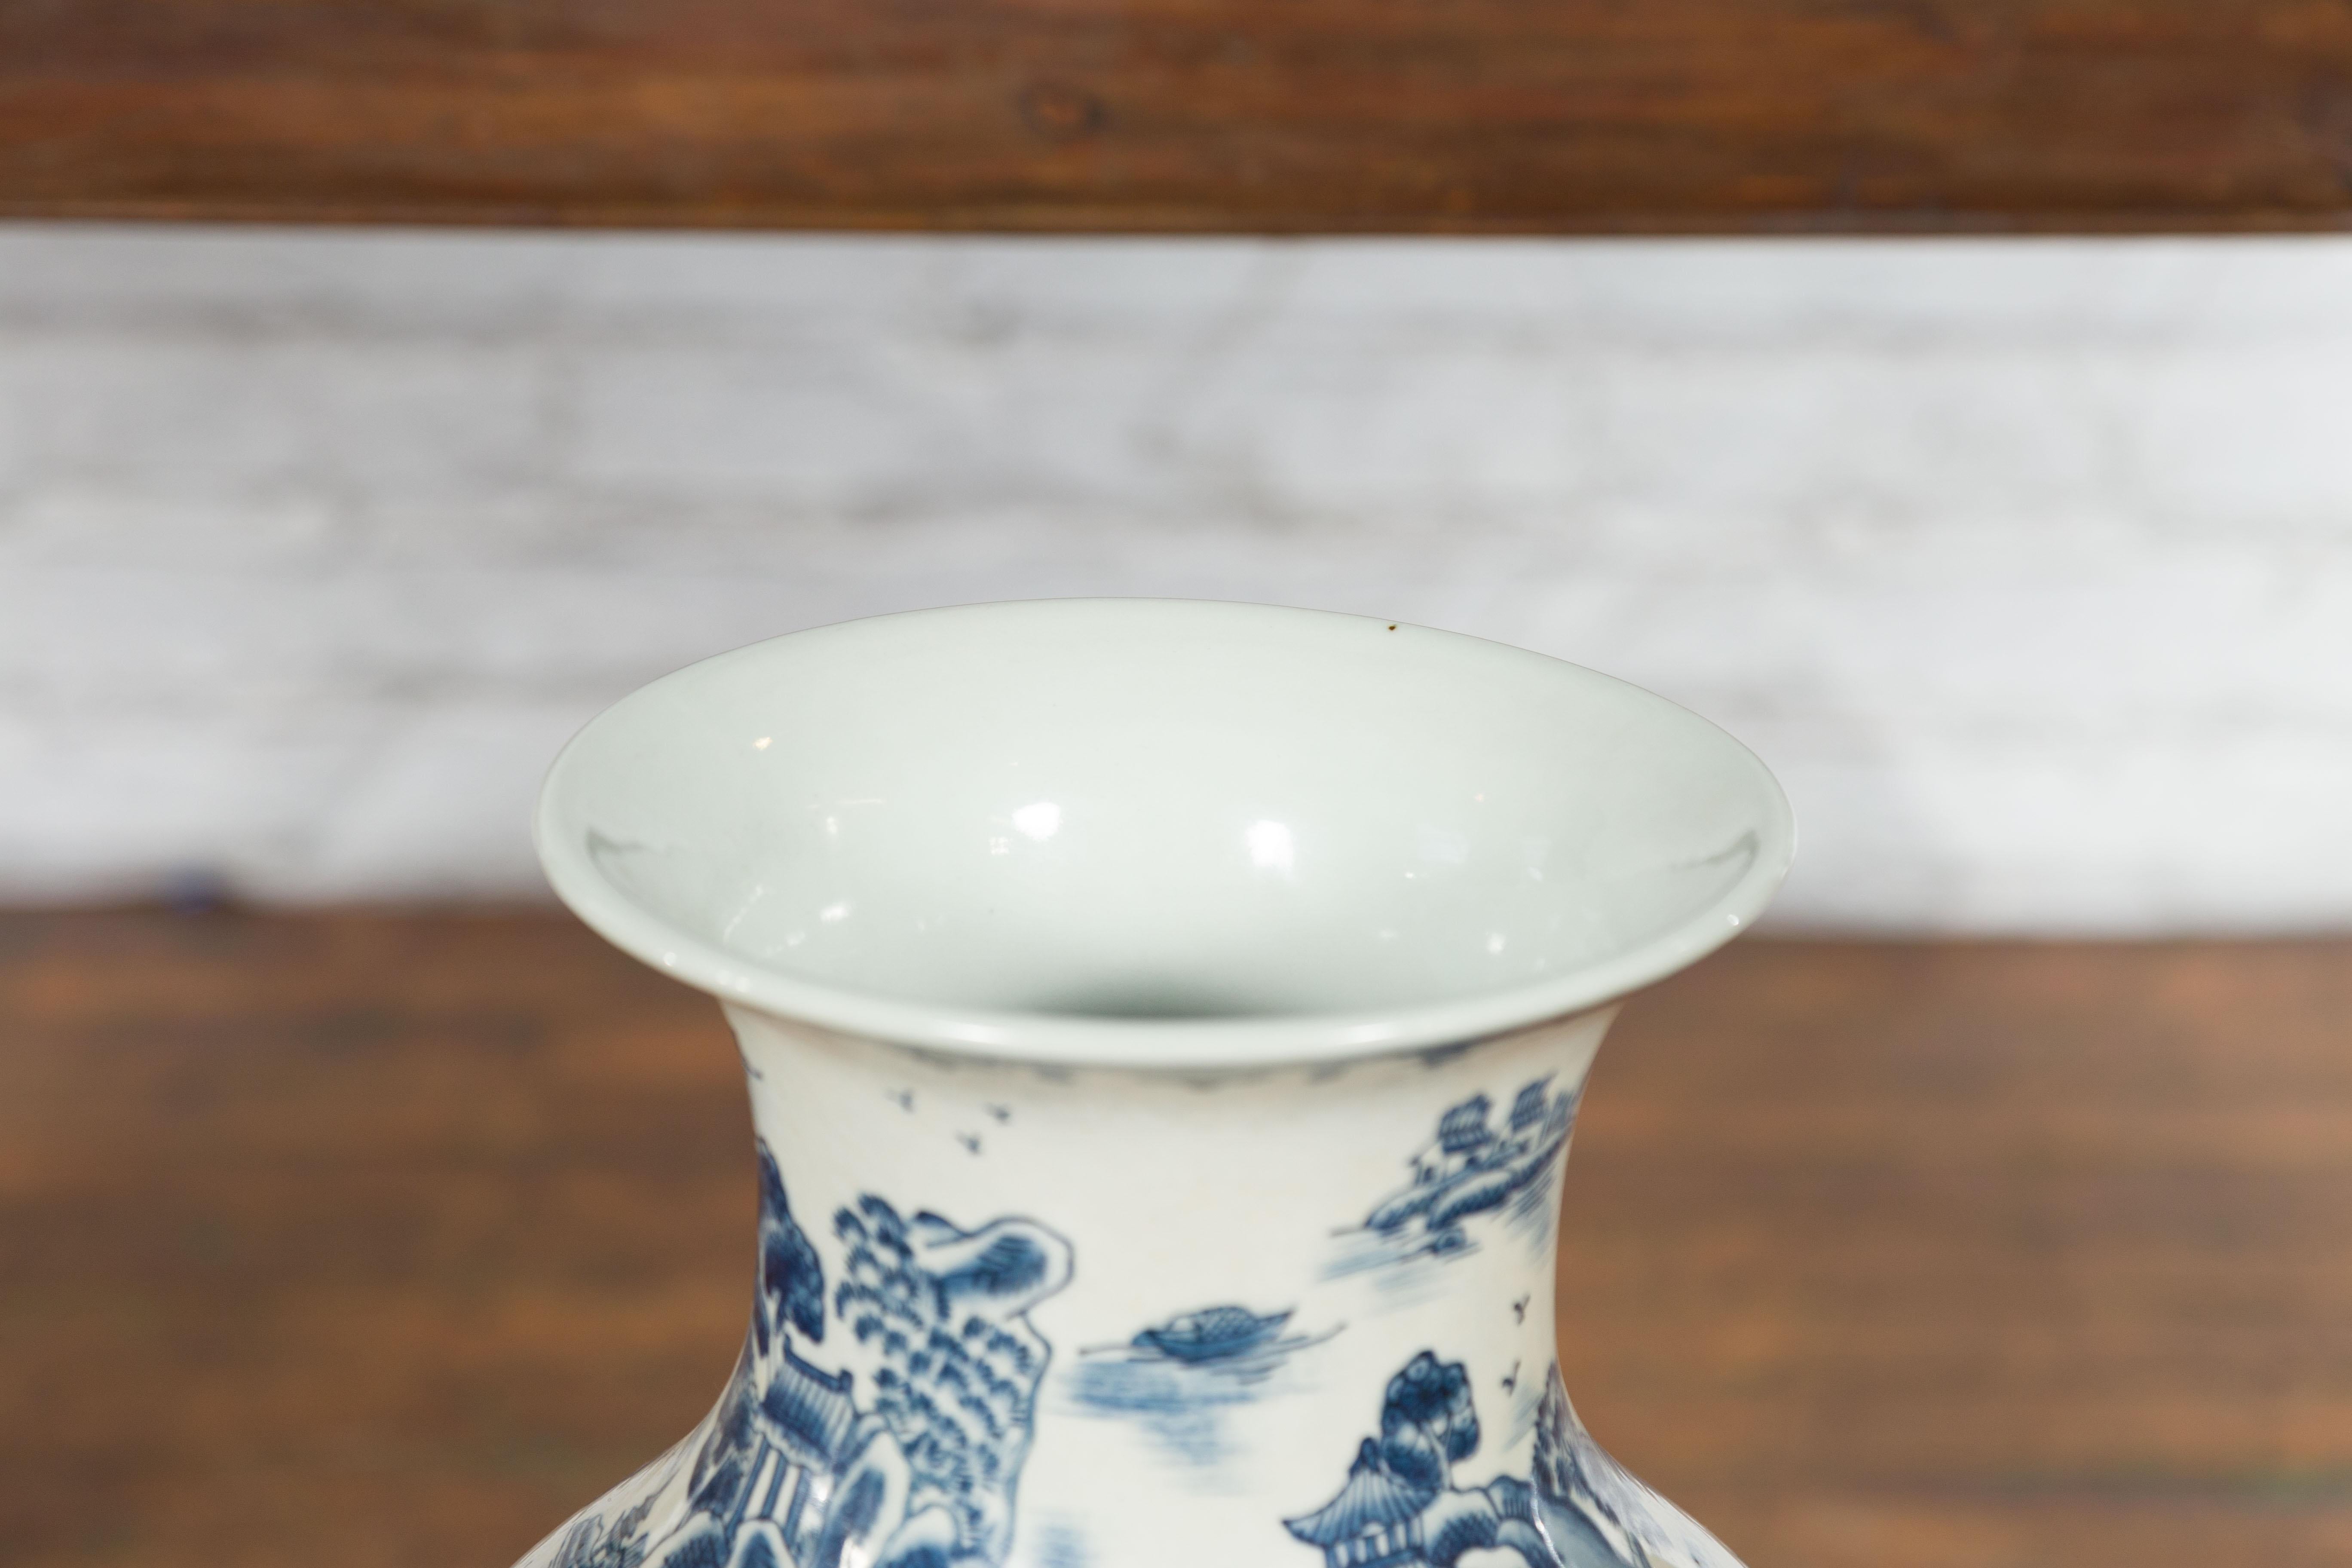 Chinese Vintage Blue and White Porcelain Vase with Landscapes and Architectures For Sale 4